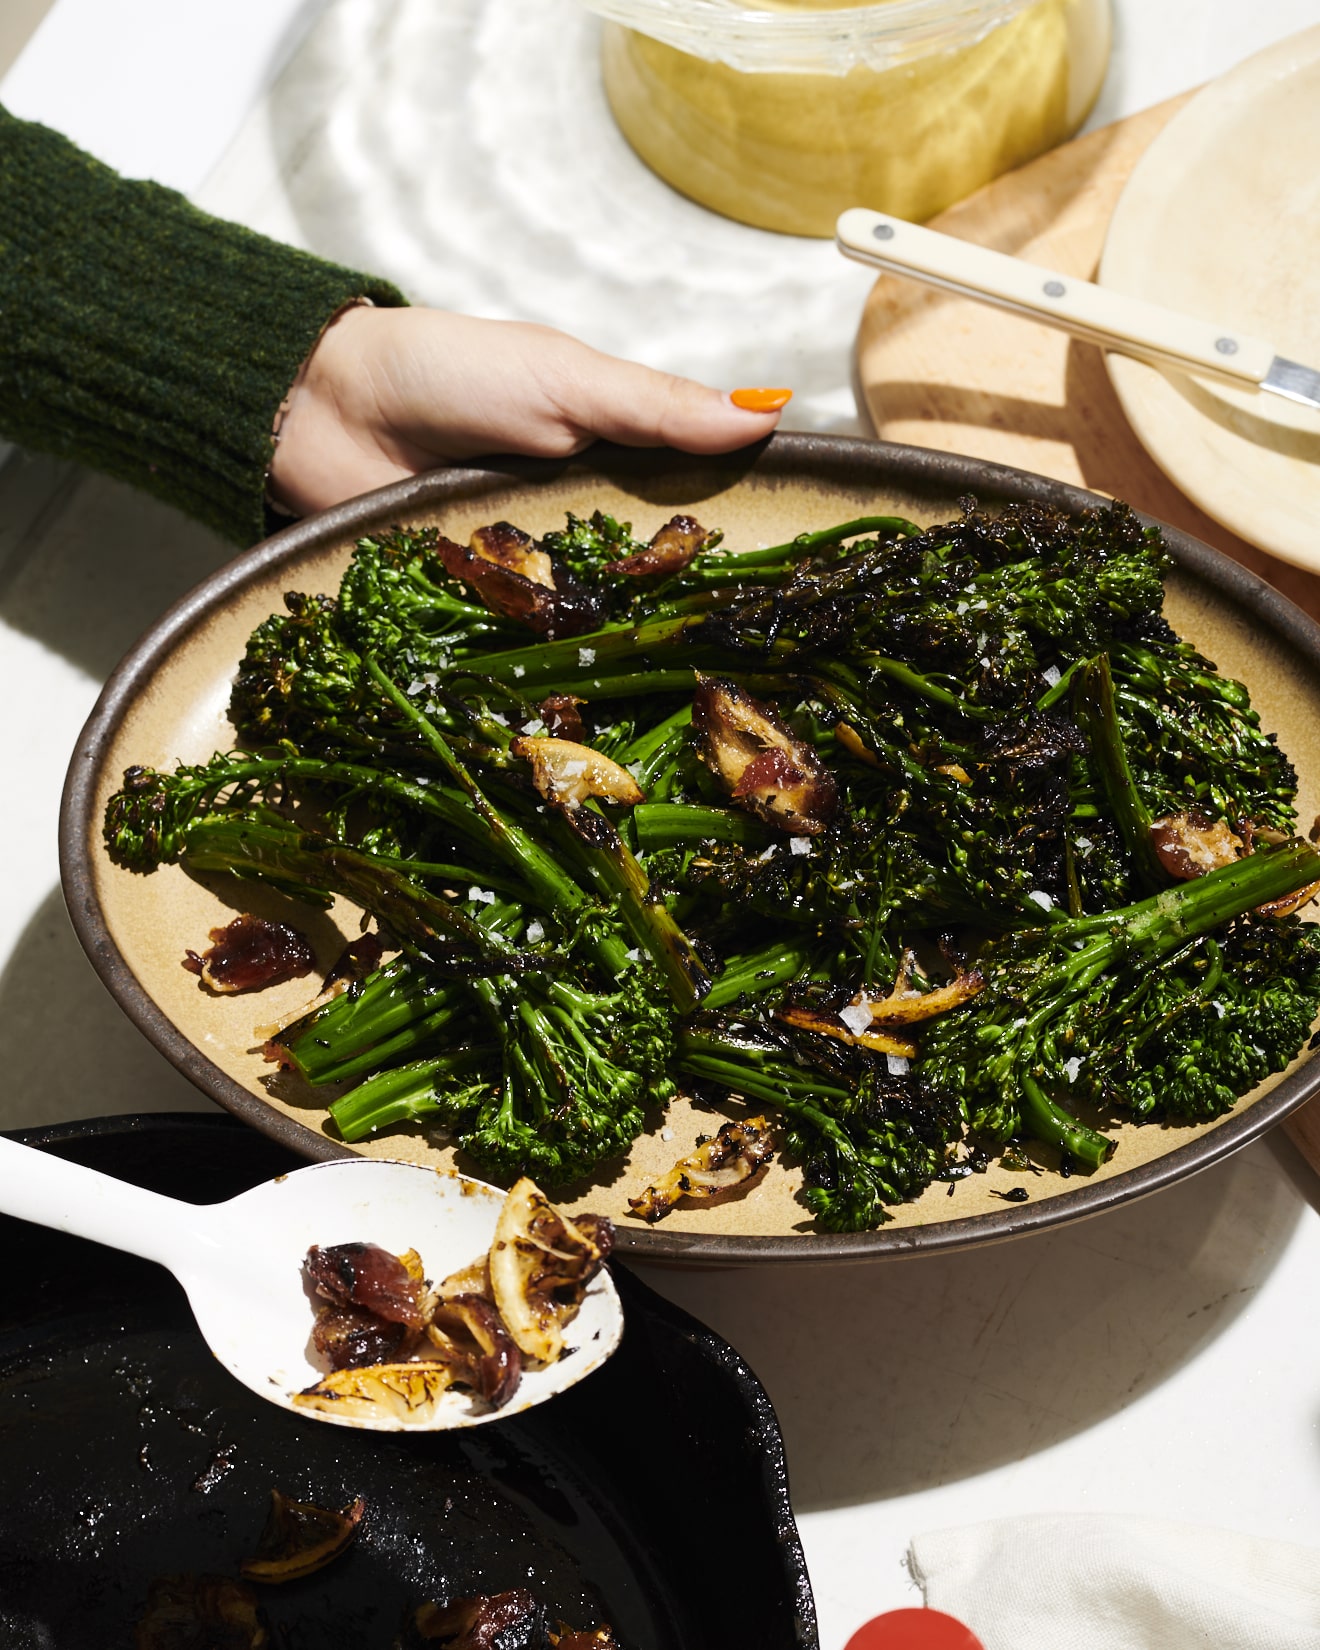 A photo of the Blistered Broccolini from the Caldo Verde special dinner.